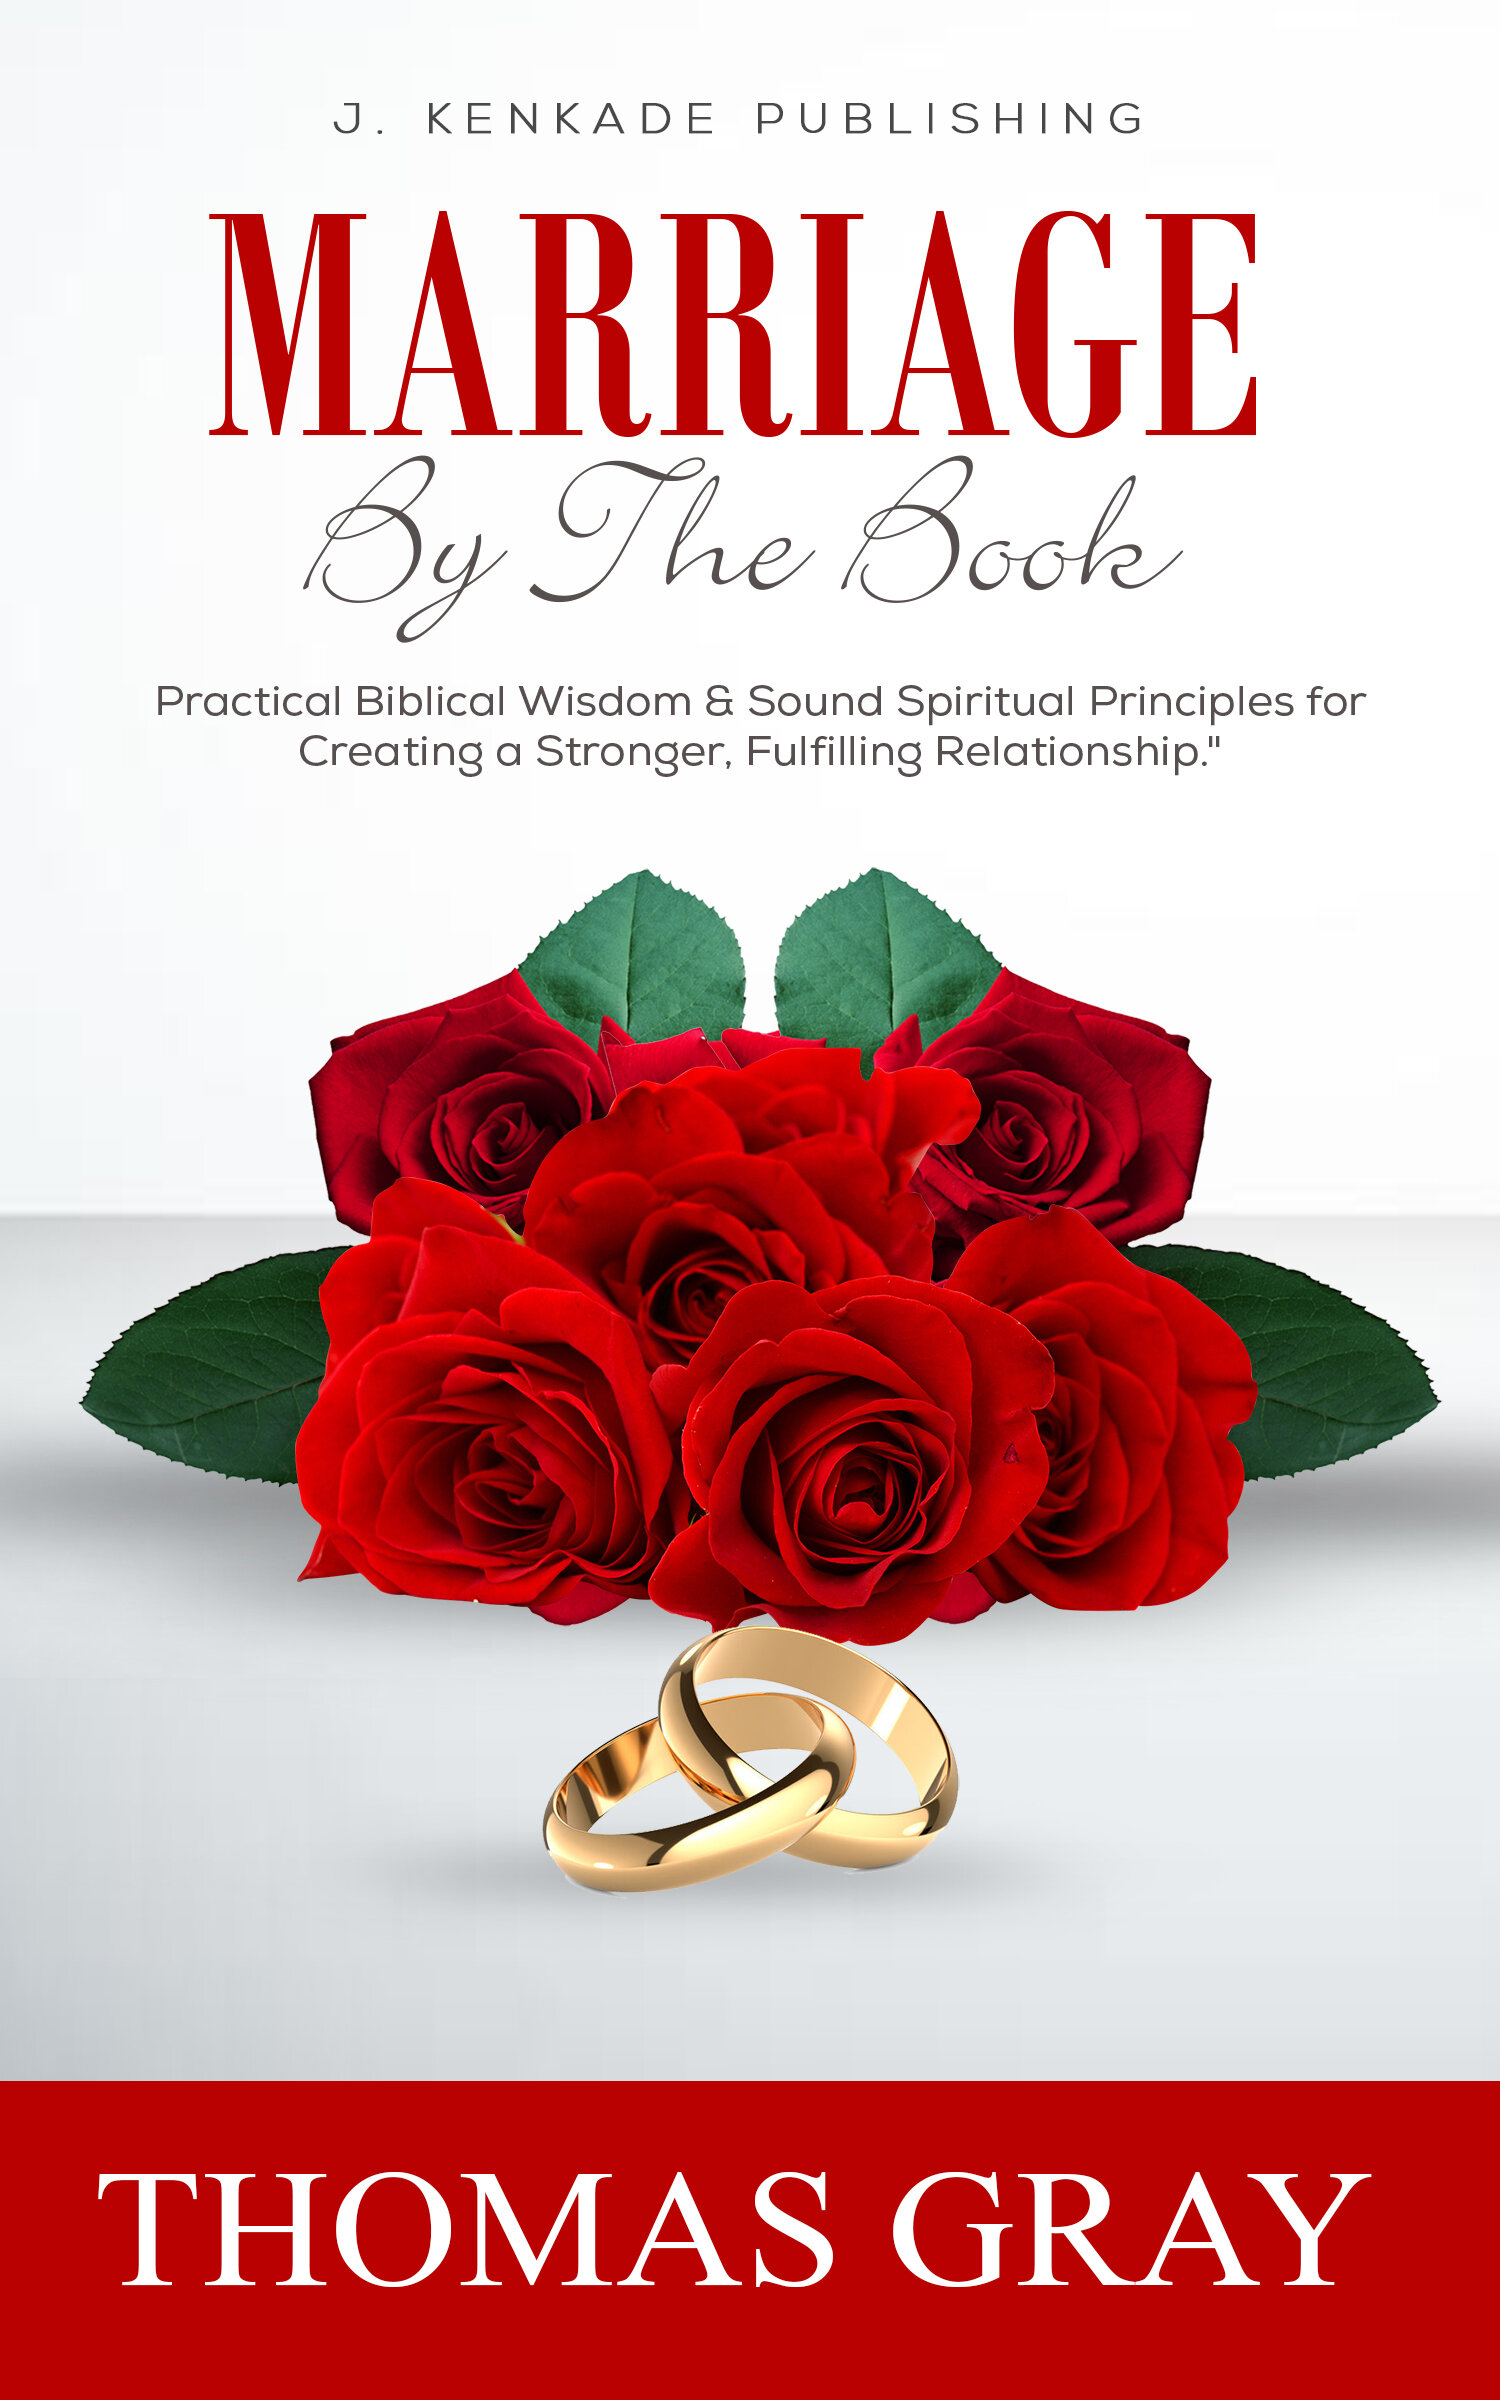 eBook-Official-Marriage By the Book.jpg